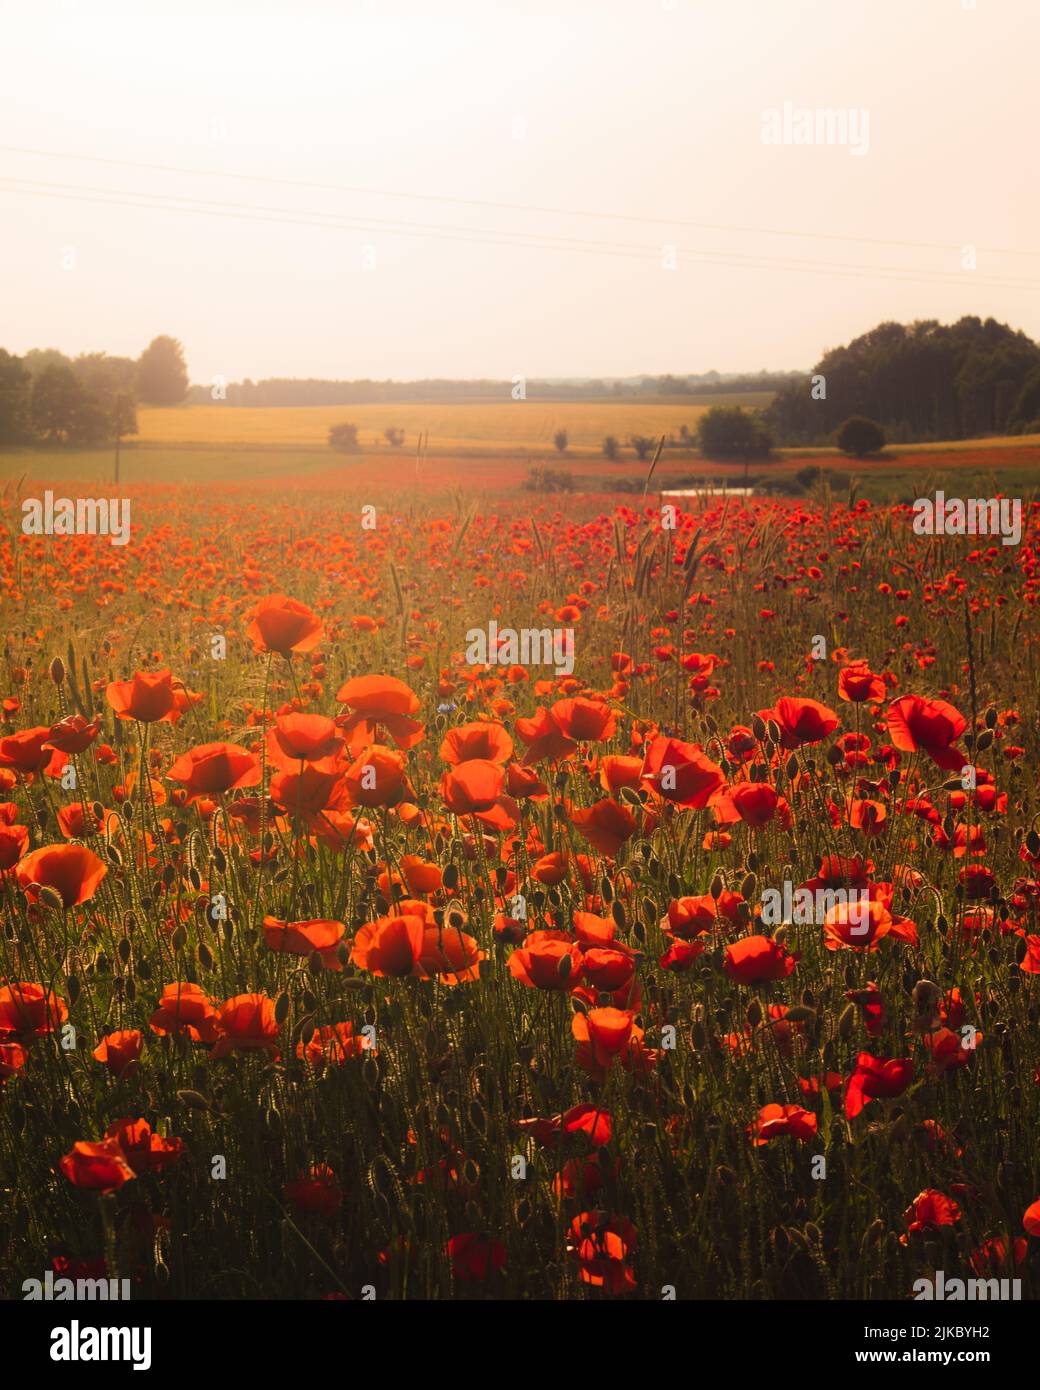 A vertical view of a beautiful red poppy field in bloom at sunset Stock Photo